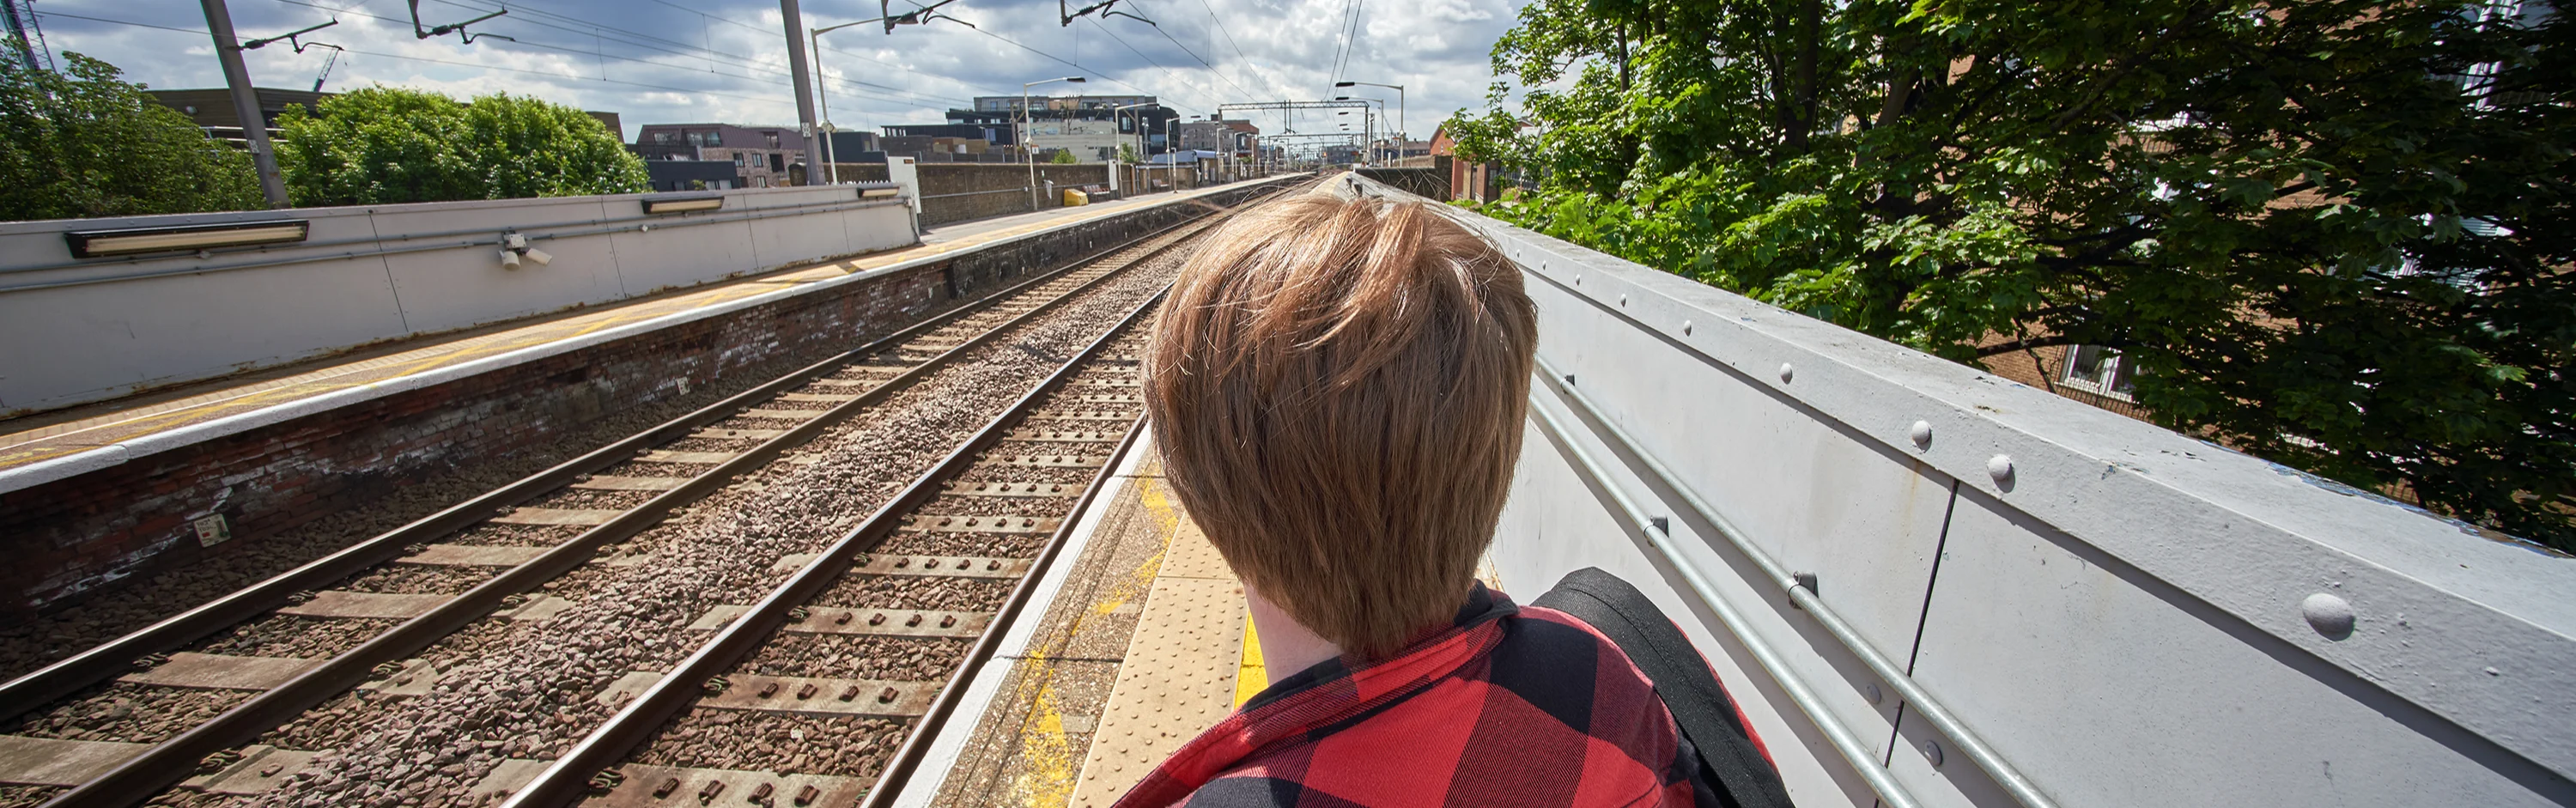 the back of a young man's head who is standing on a railway station platform in the daytime, looking into the distance down the tracks